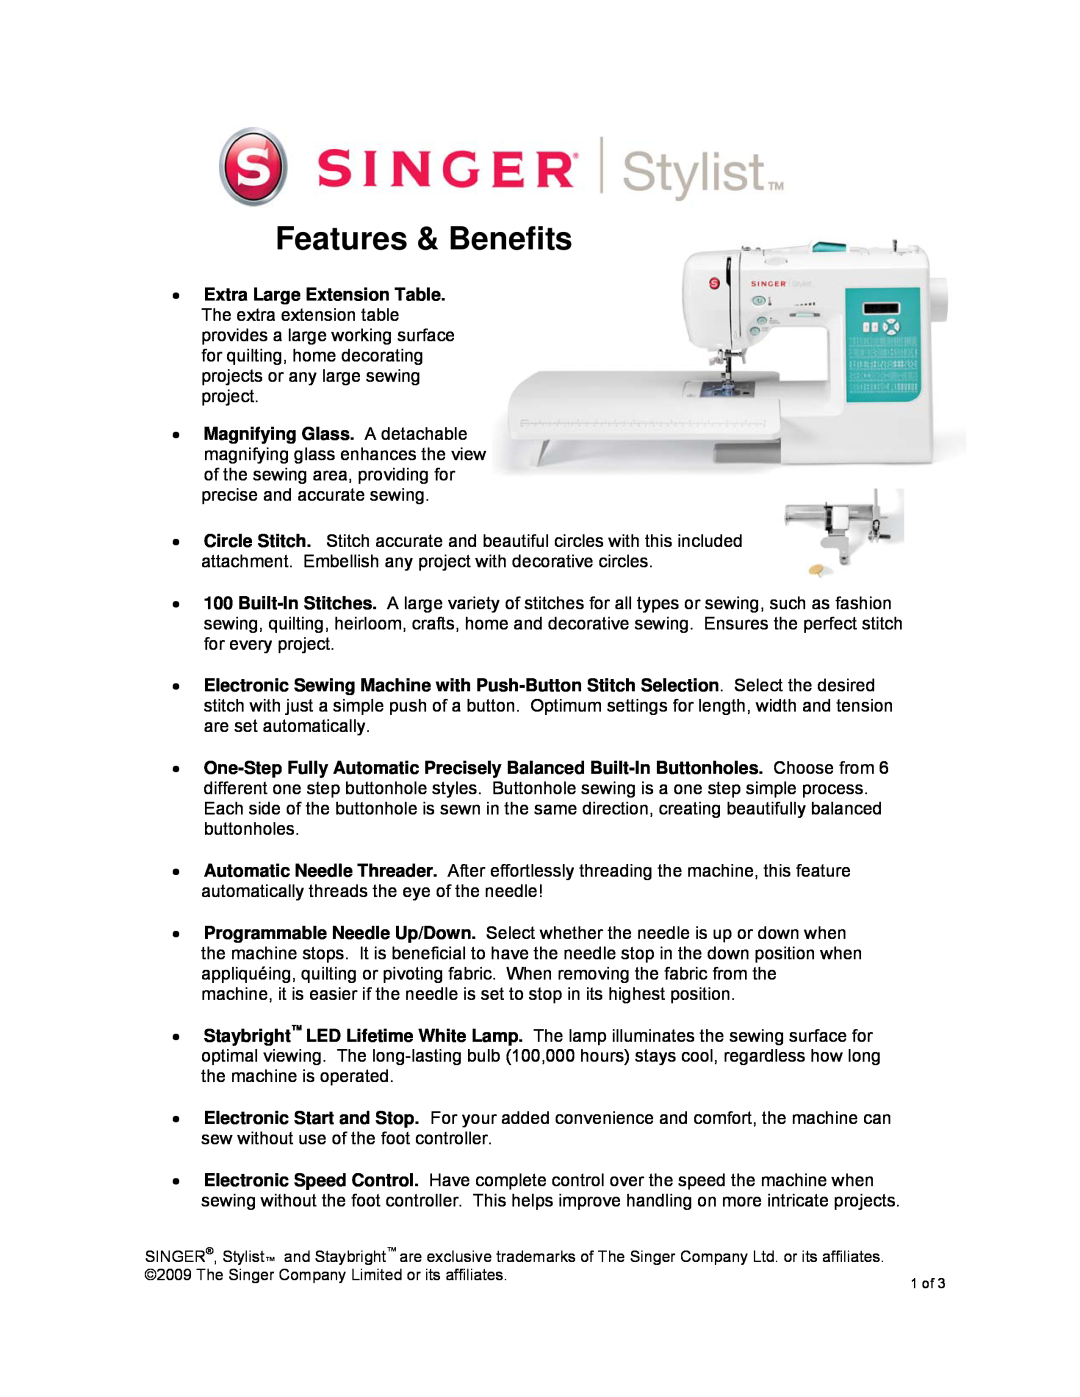 Singer 7258 manual Features & Benefits, The Singer Company Limited or its affiliates 